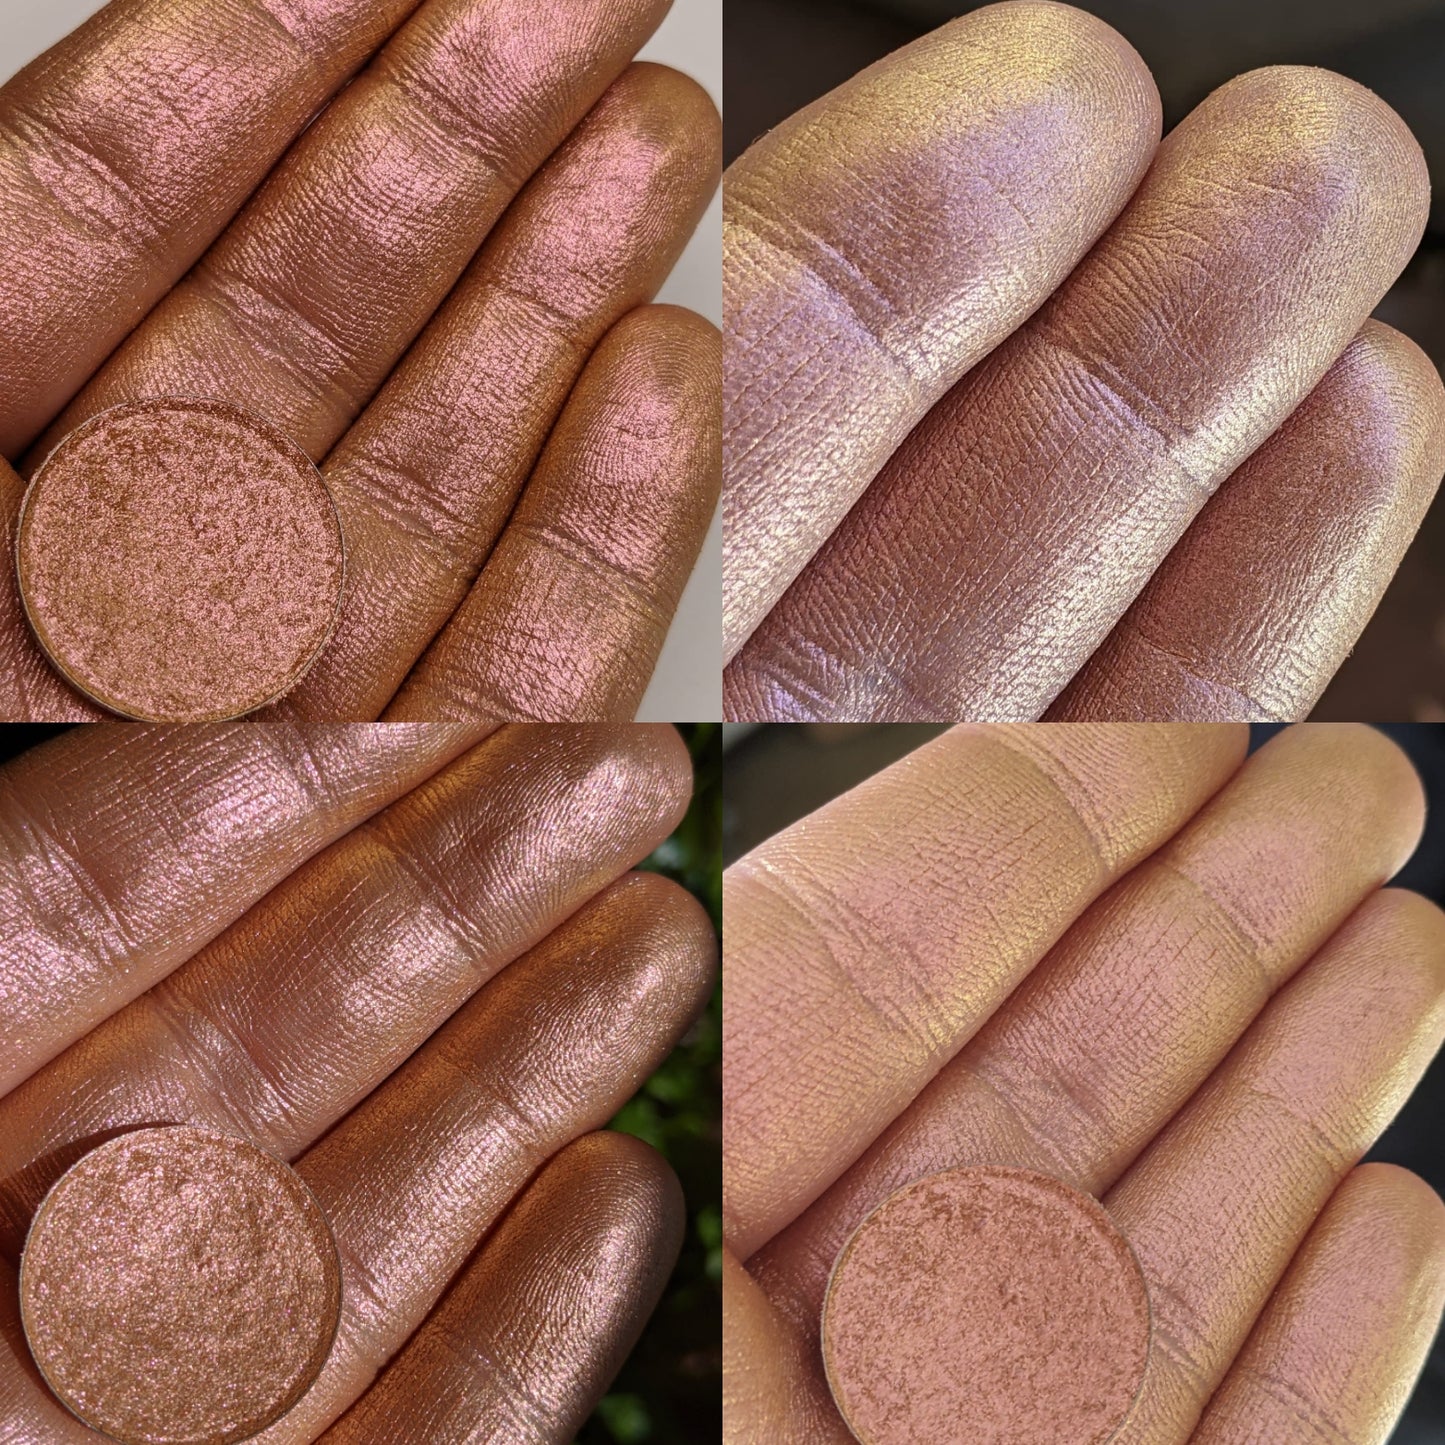 Hircine - Eyeshadow Duochrome/Multichrome Gold, Peachy-Champagne, Red